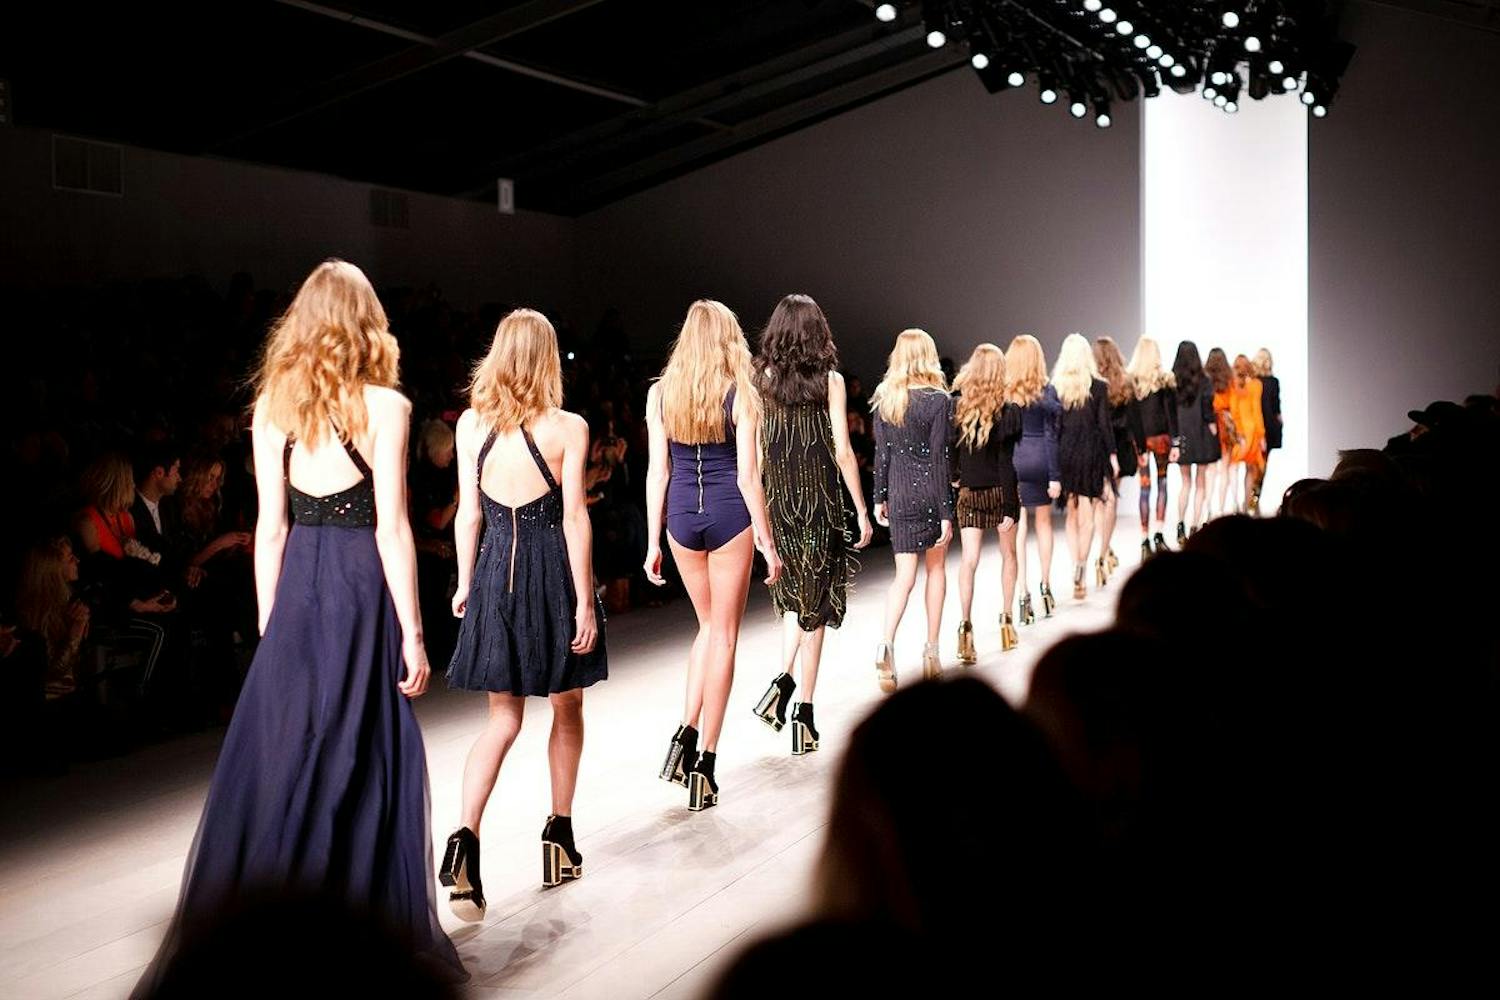 A long line of models on the catwalk.